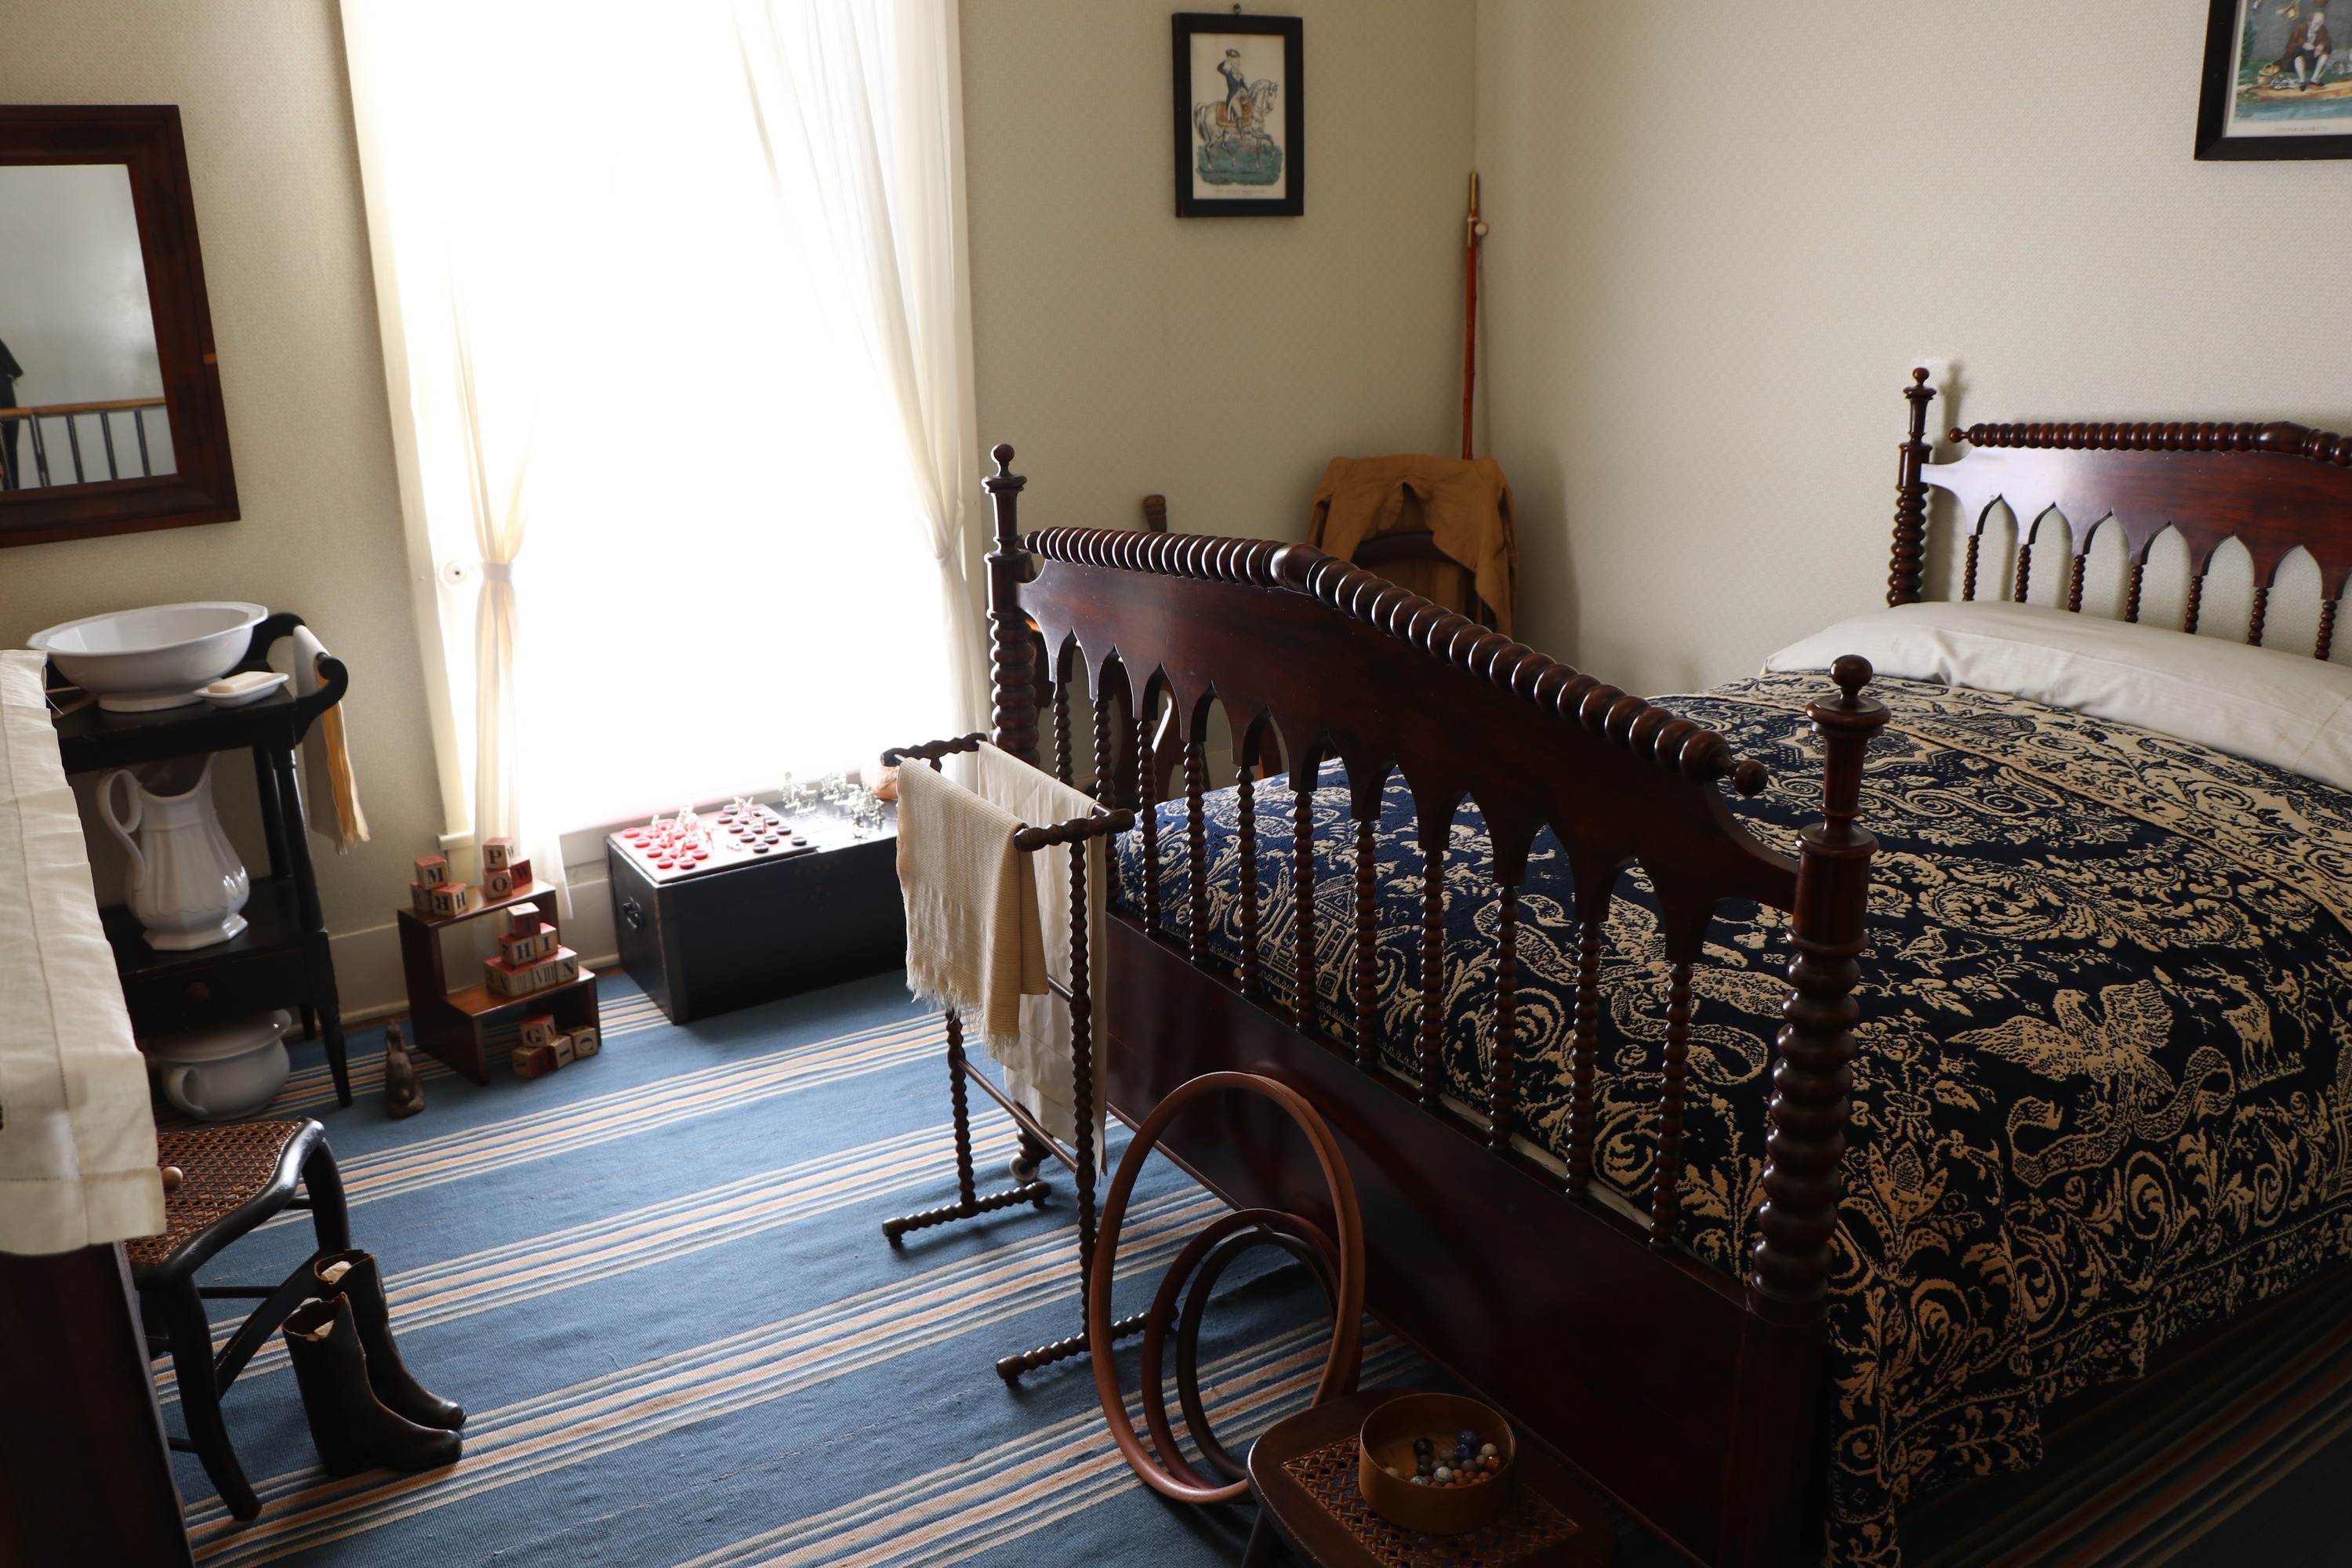 A bedroom with a blue striped rug, plain walls, and historic toys from the 19th century.